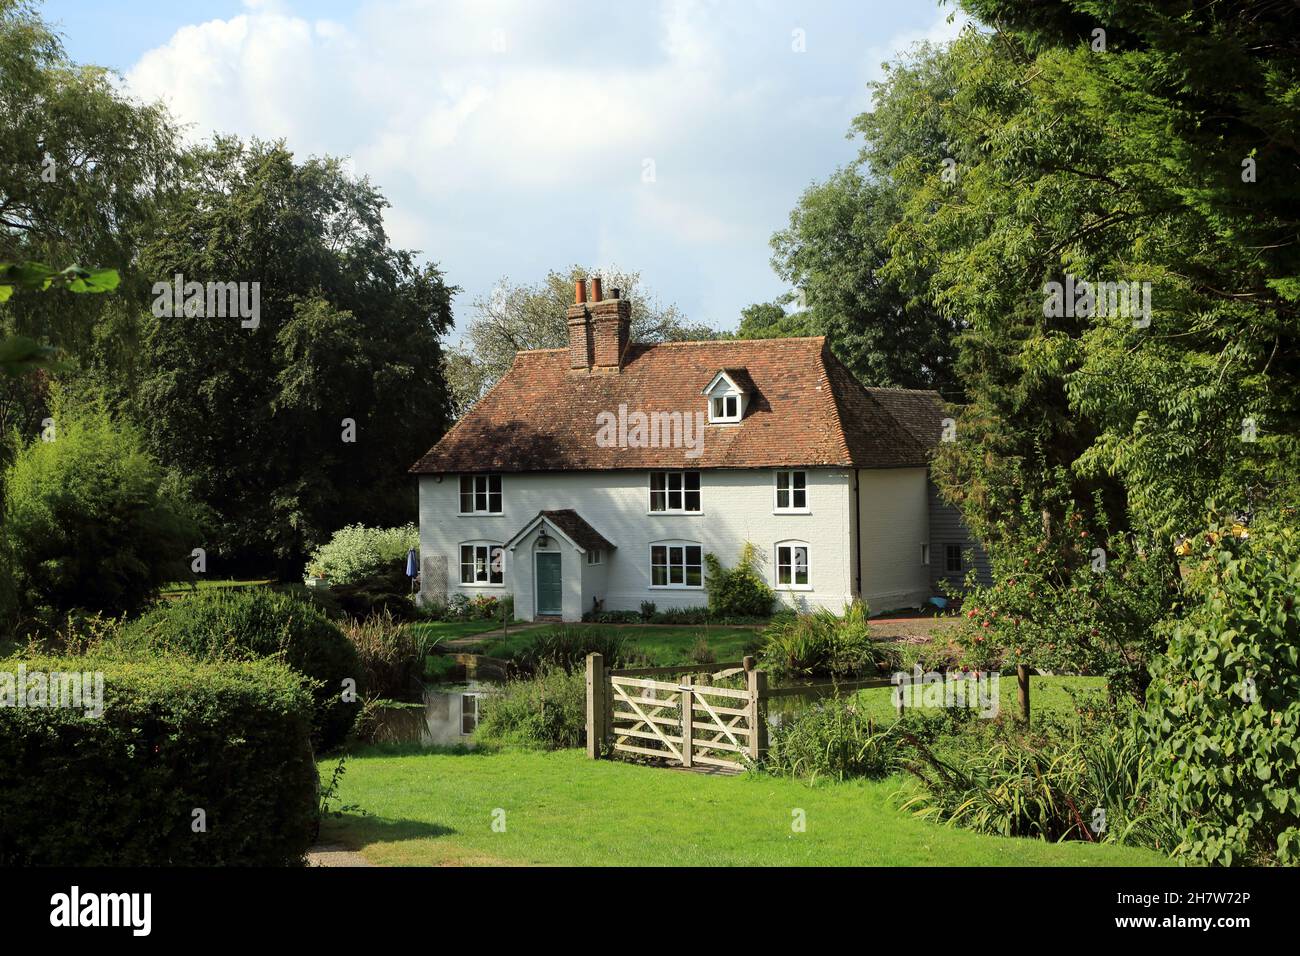 17th Century farmhouse with tile roof, Cage Farm with pond, Stowting Hill, Stowting in the Kent Downs AONB, Ashford, Kent, England, United Kingdom Stock Photo